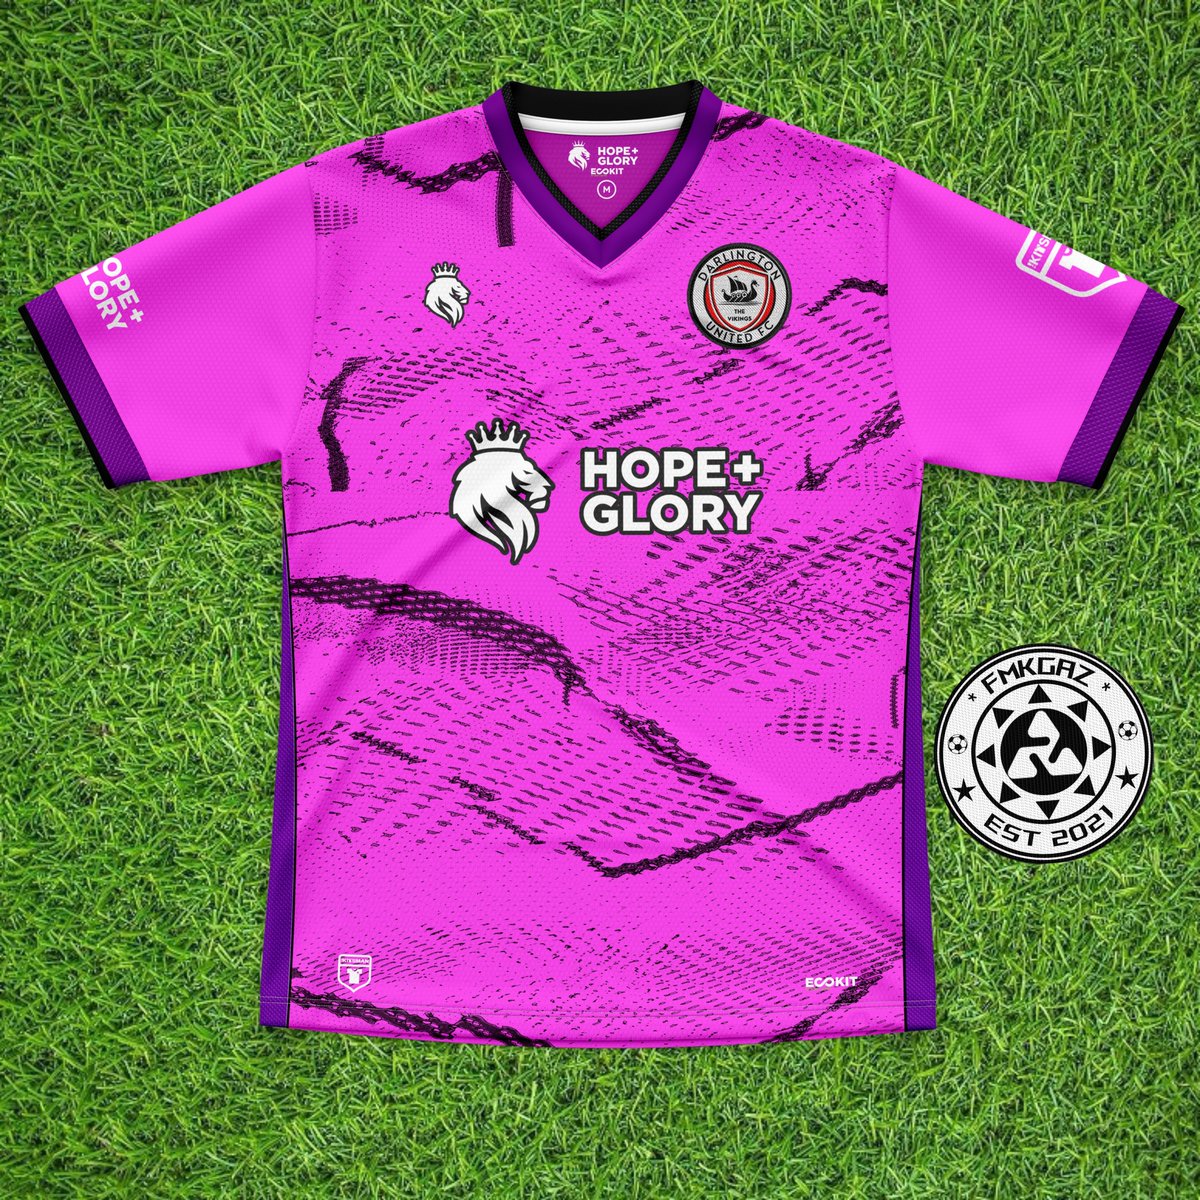 So Here's my take on the Kits for @darlingtonutd 
Home Red, Away Yellow & Third Pink. With @hgsportswear and @The_Kitsman for sponsors and manufacturers #kitdesign #DARLINGTON #hopeandglory #TheKitsman